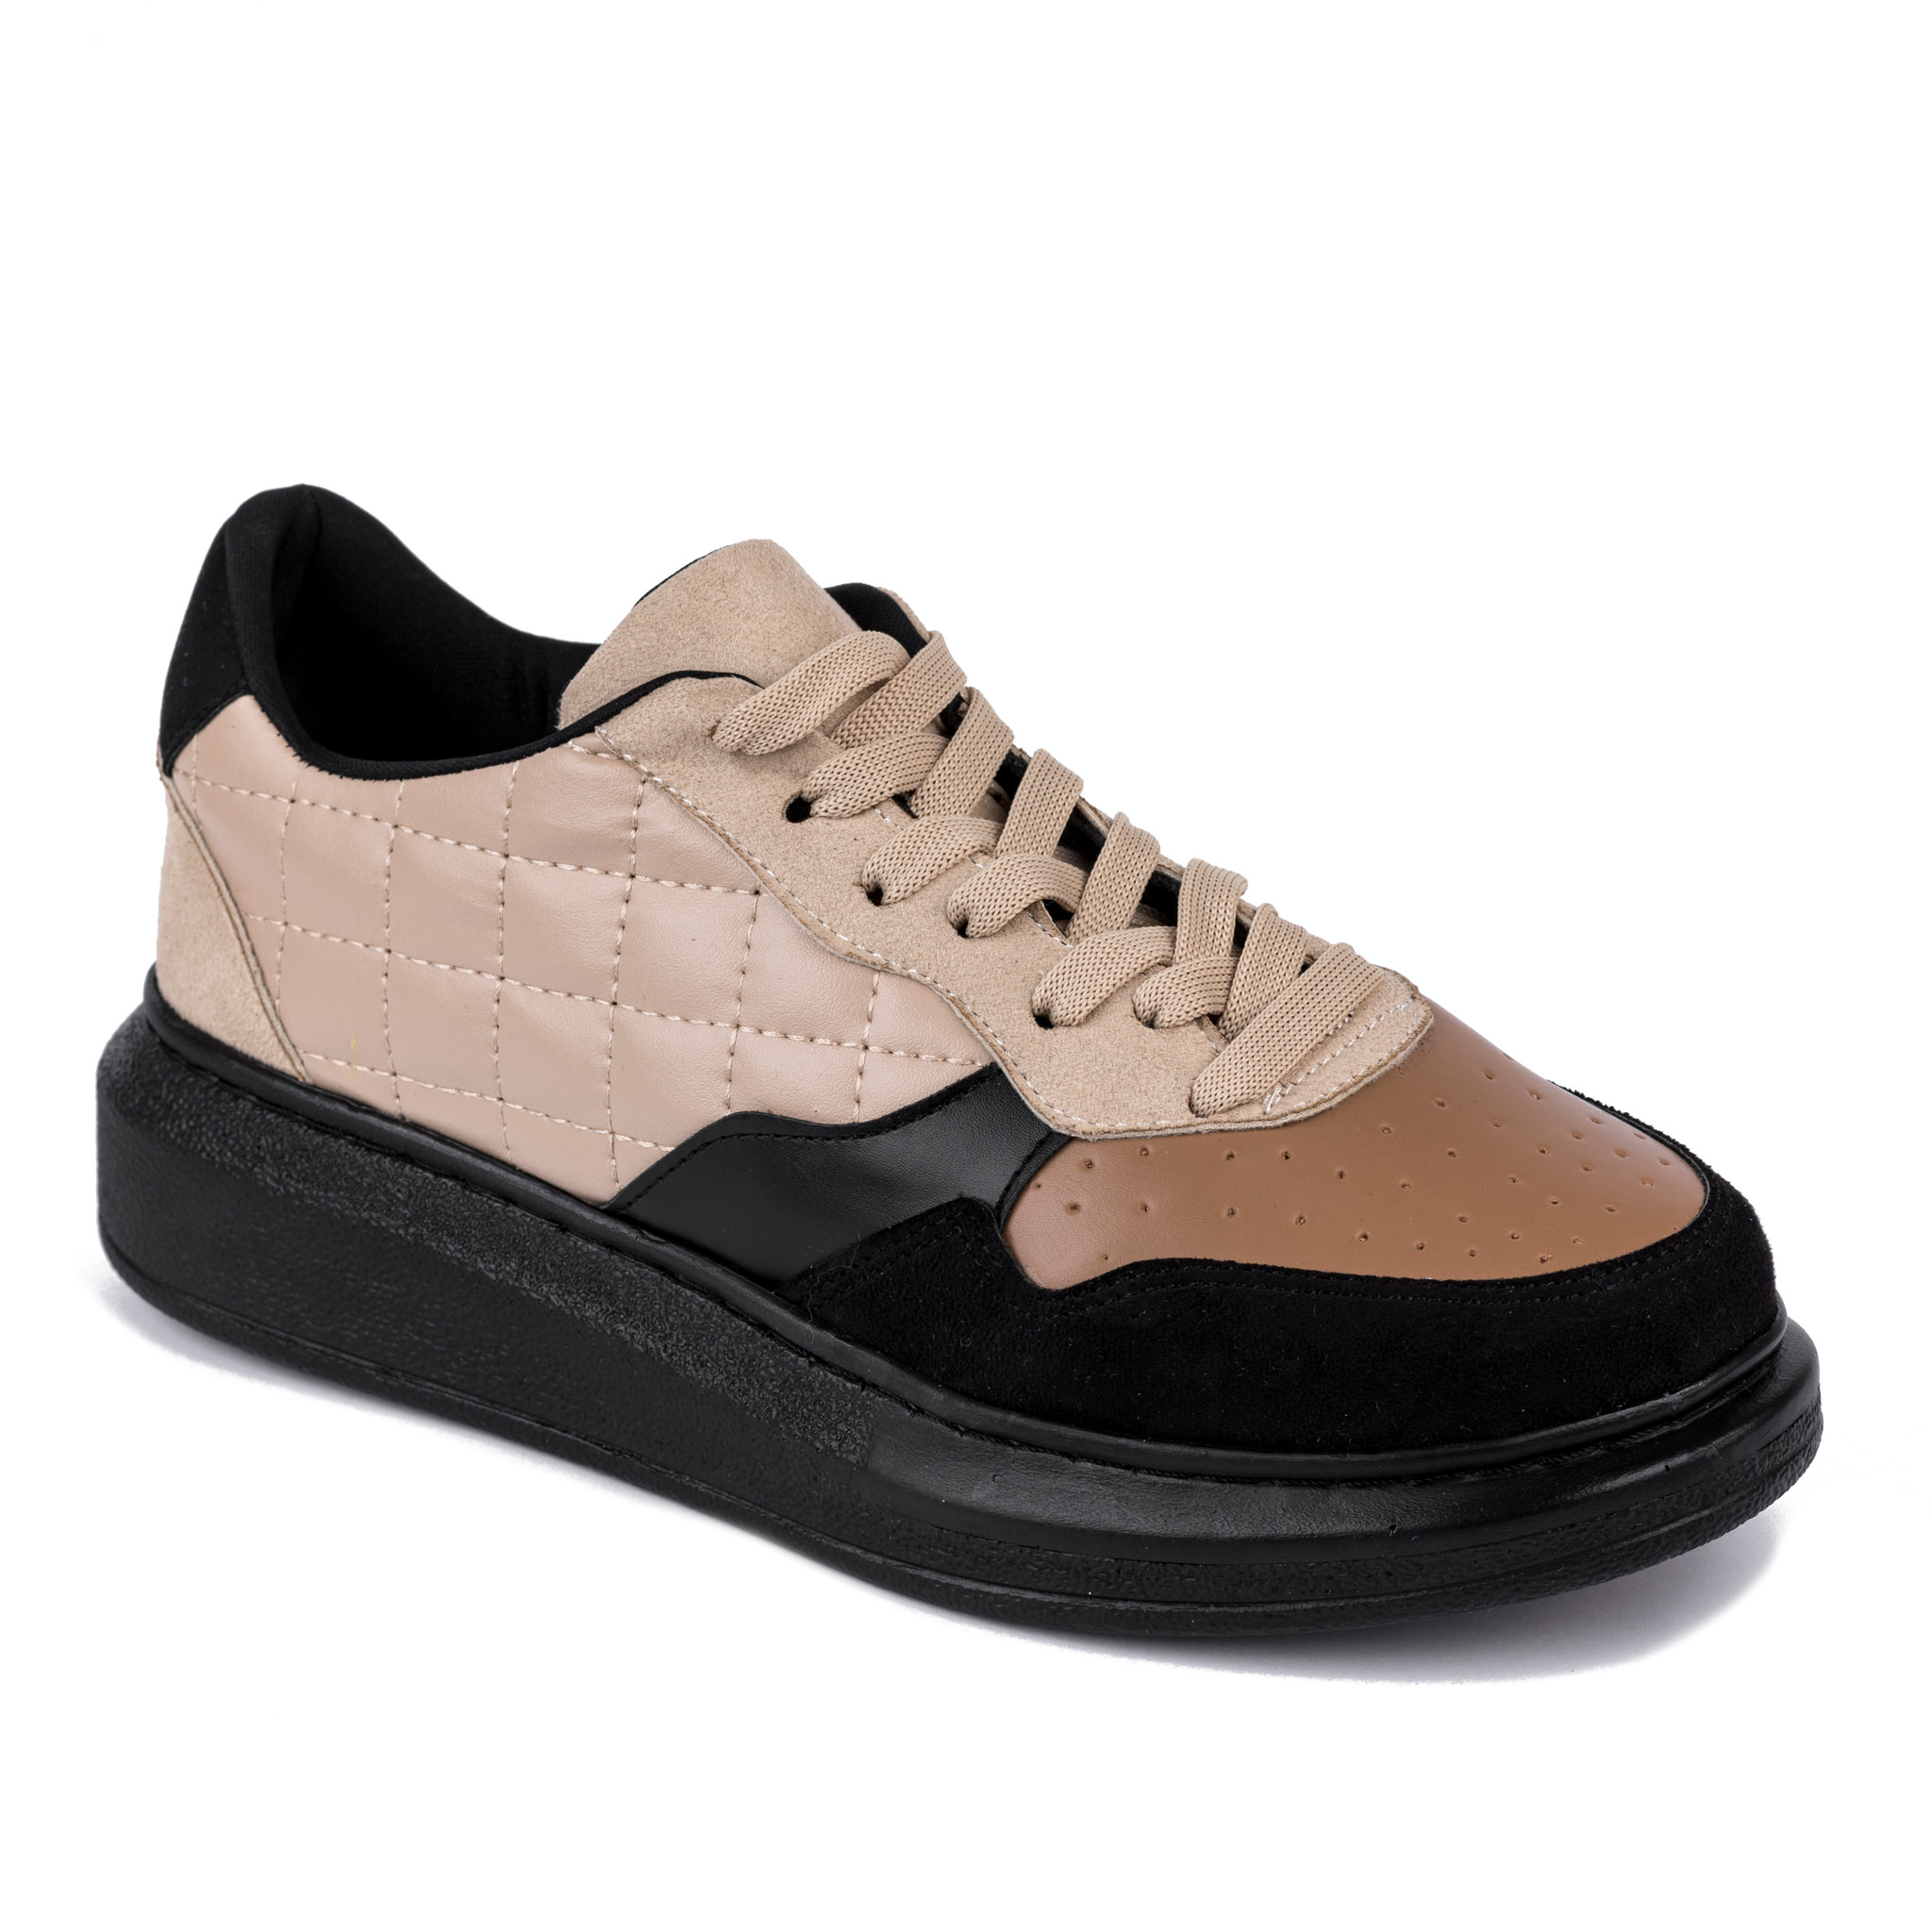 SAW SNEAKERS WITH HIGH SOLE - BEIGE/BLACK